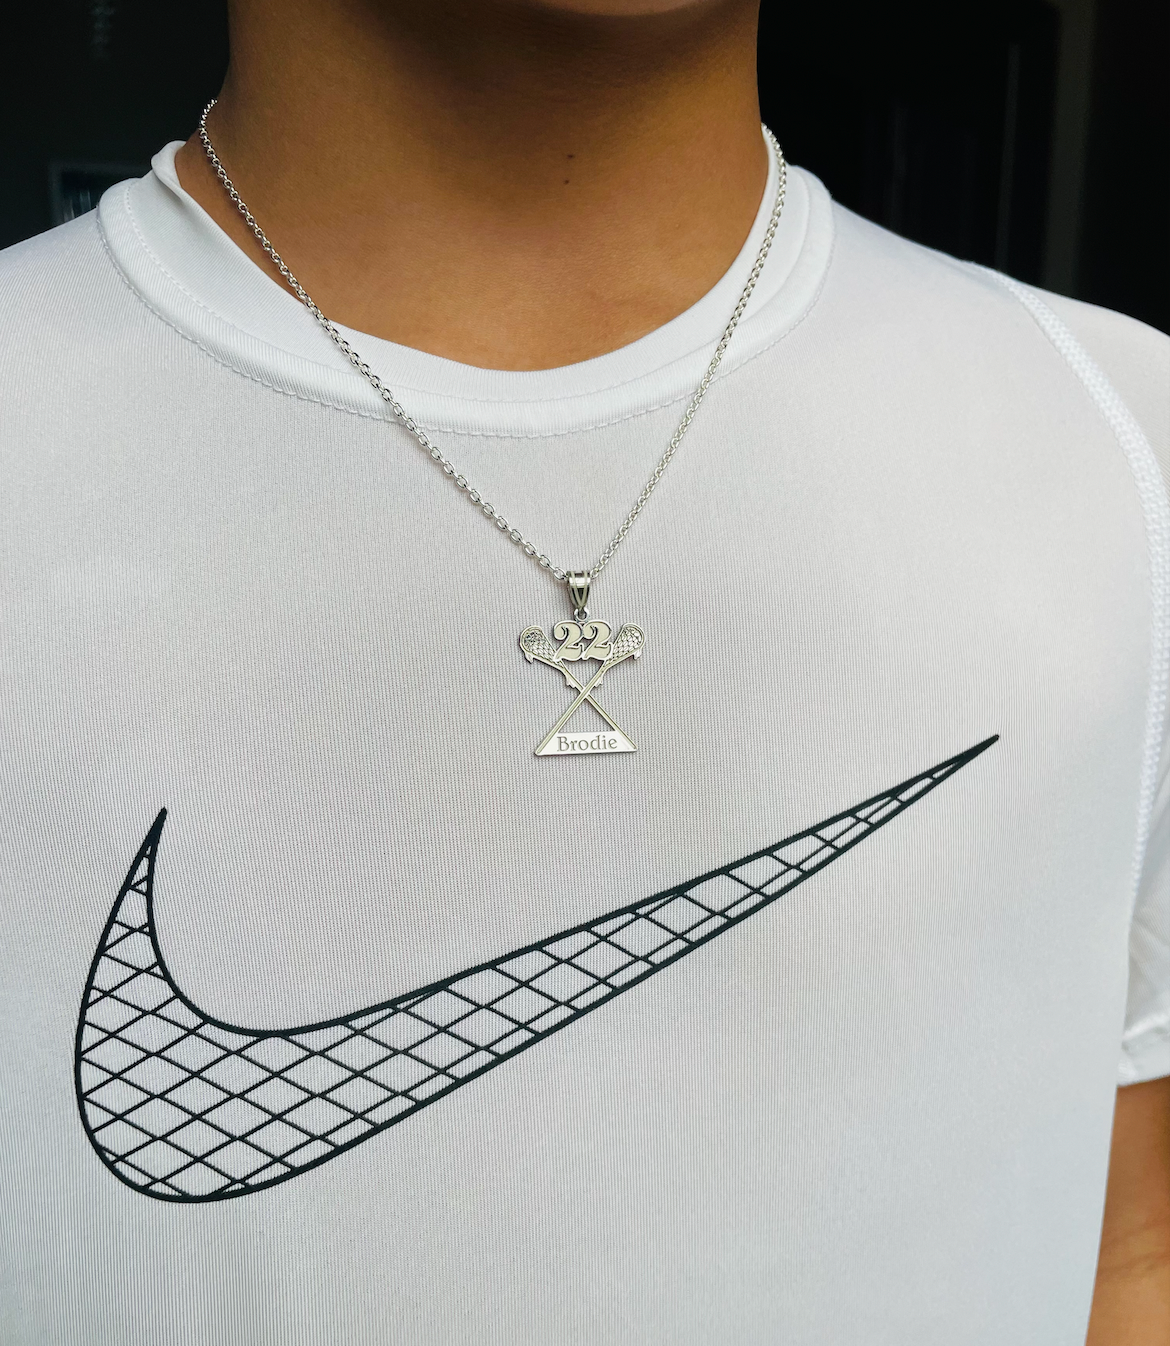 Personalized Lacrosse Pendant w/ Name & Number Necklace included  in Sterling Silver , Gold Plated or 10k Gold Laser Engraved LAX Pendant